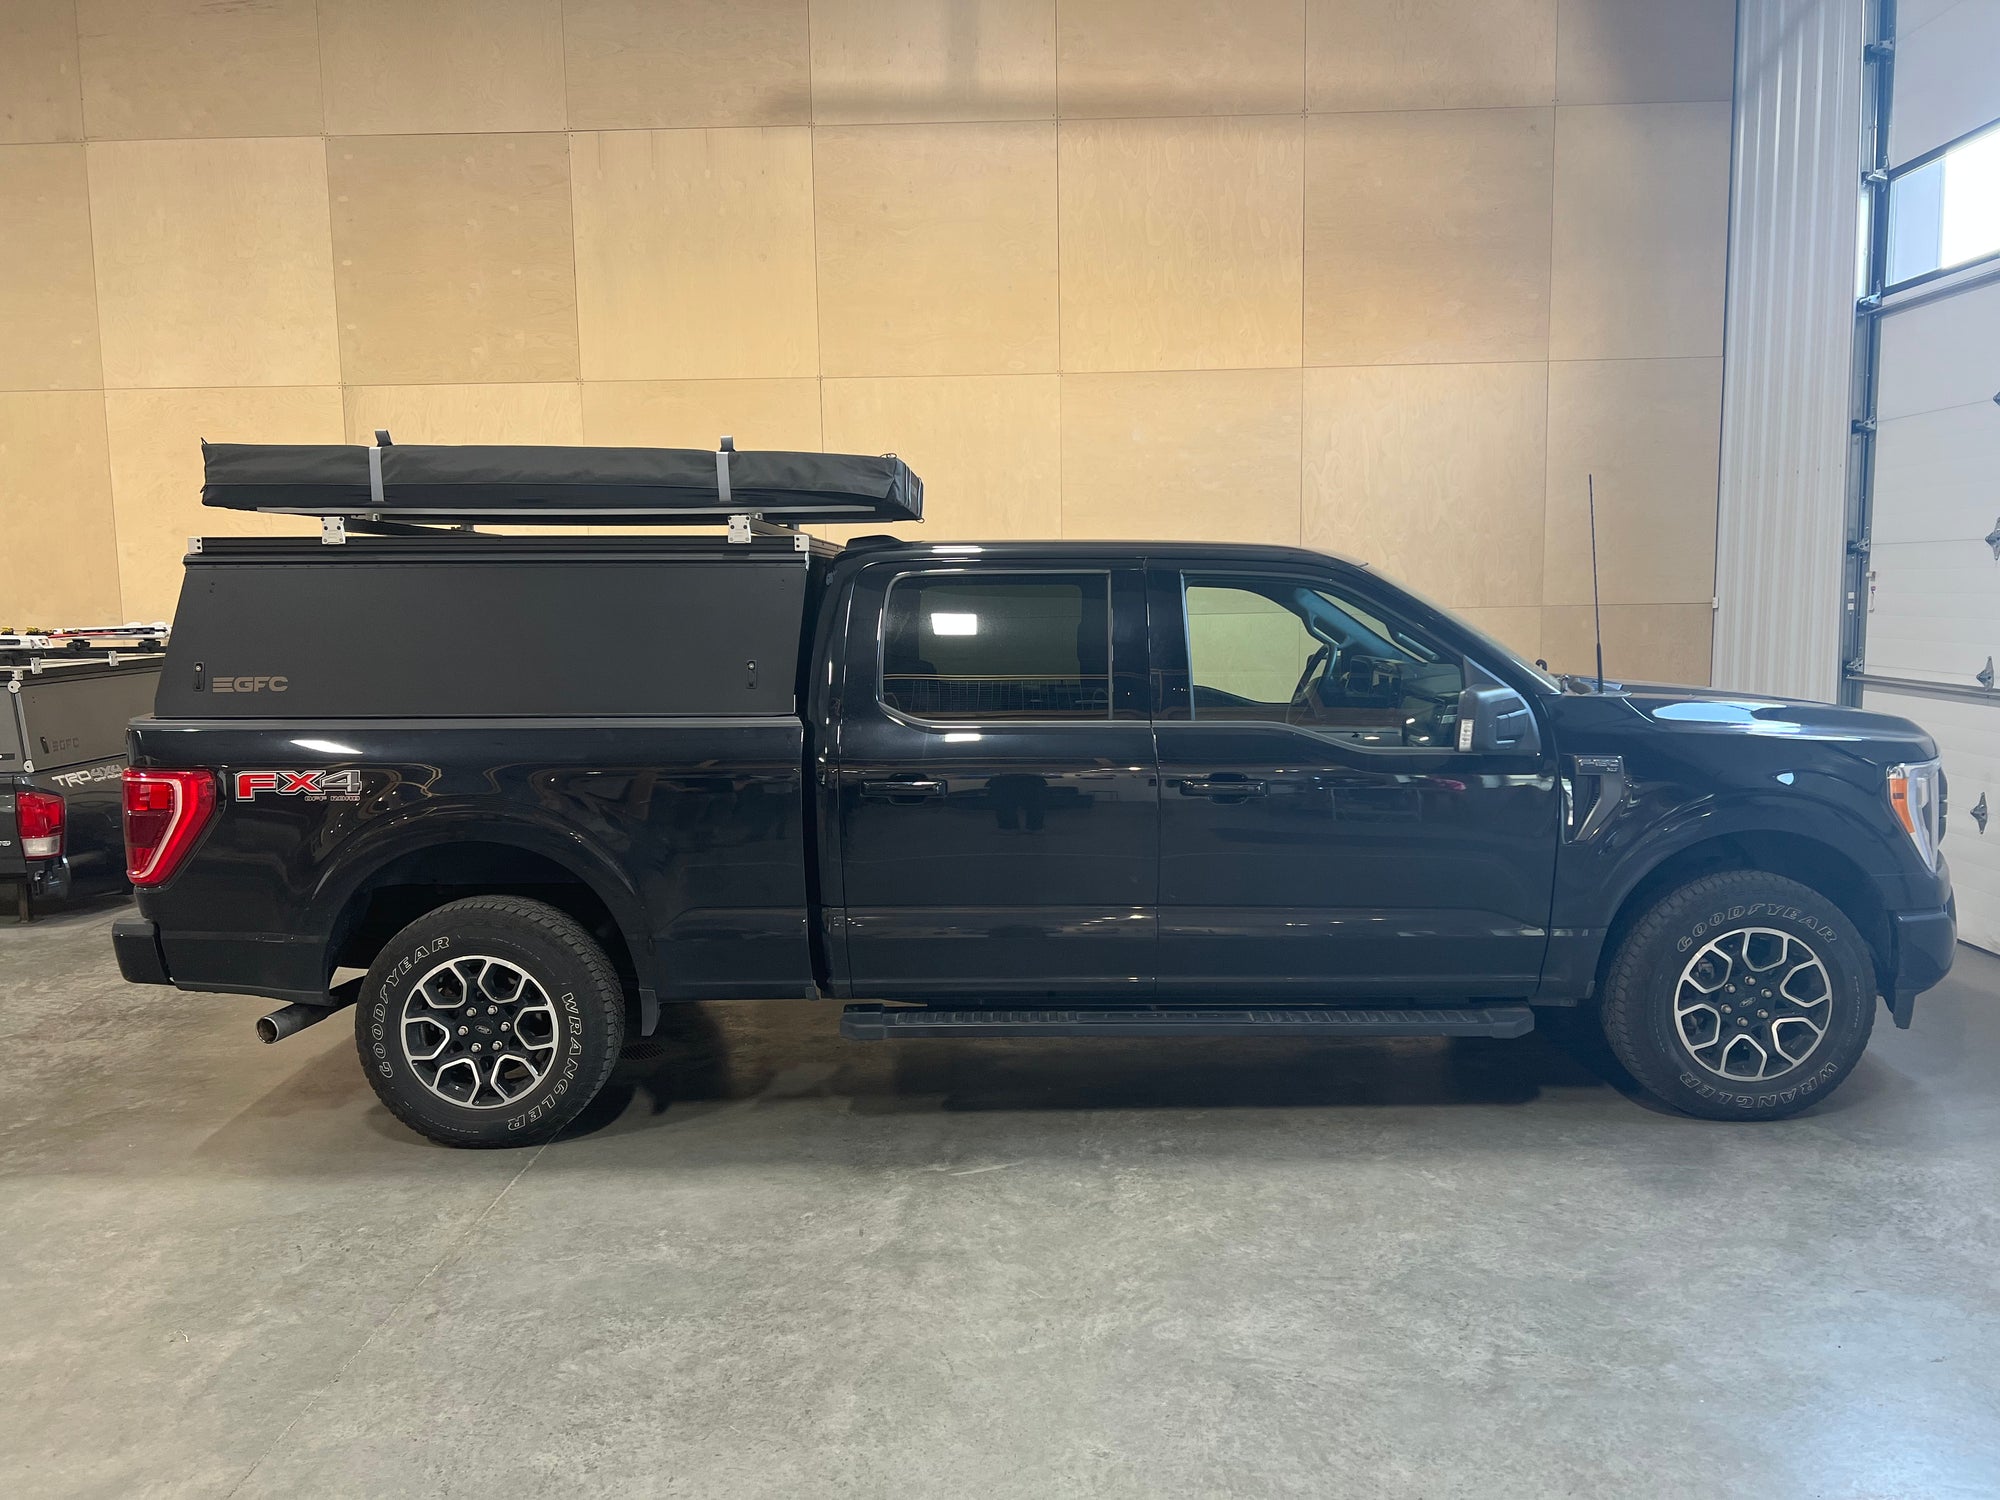 2022 Ford F150 Topper - Build #251 - GoFastCampers